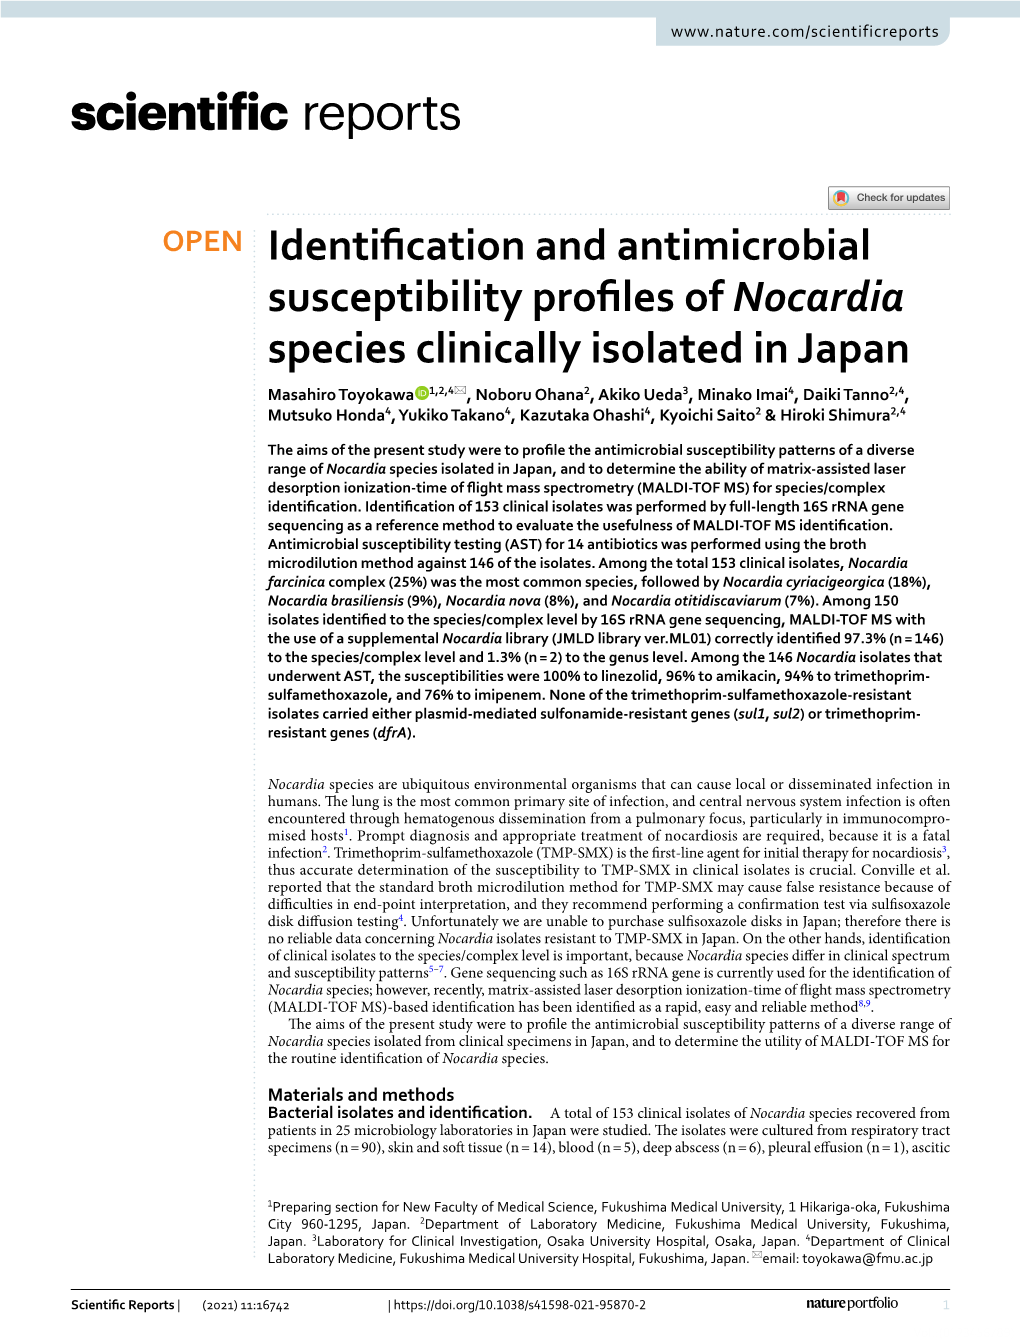 Identification and Antimicrobial Susceptibility Profiles of Nocardia